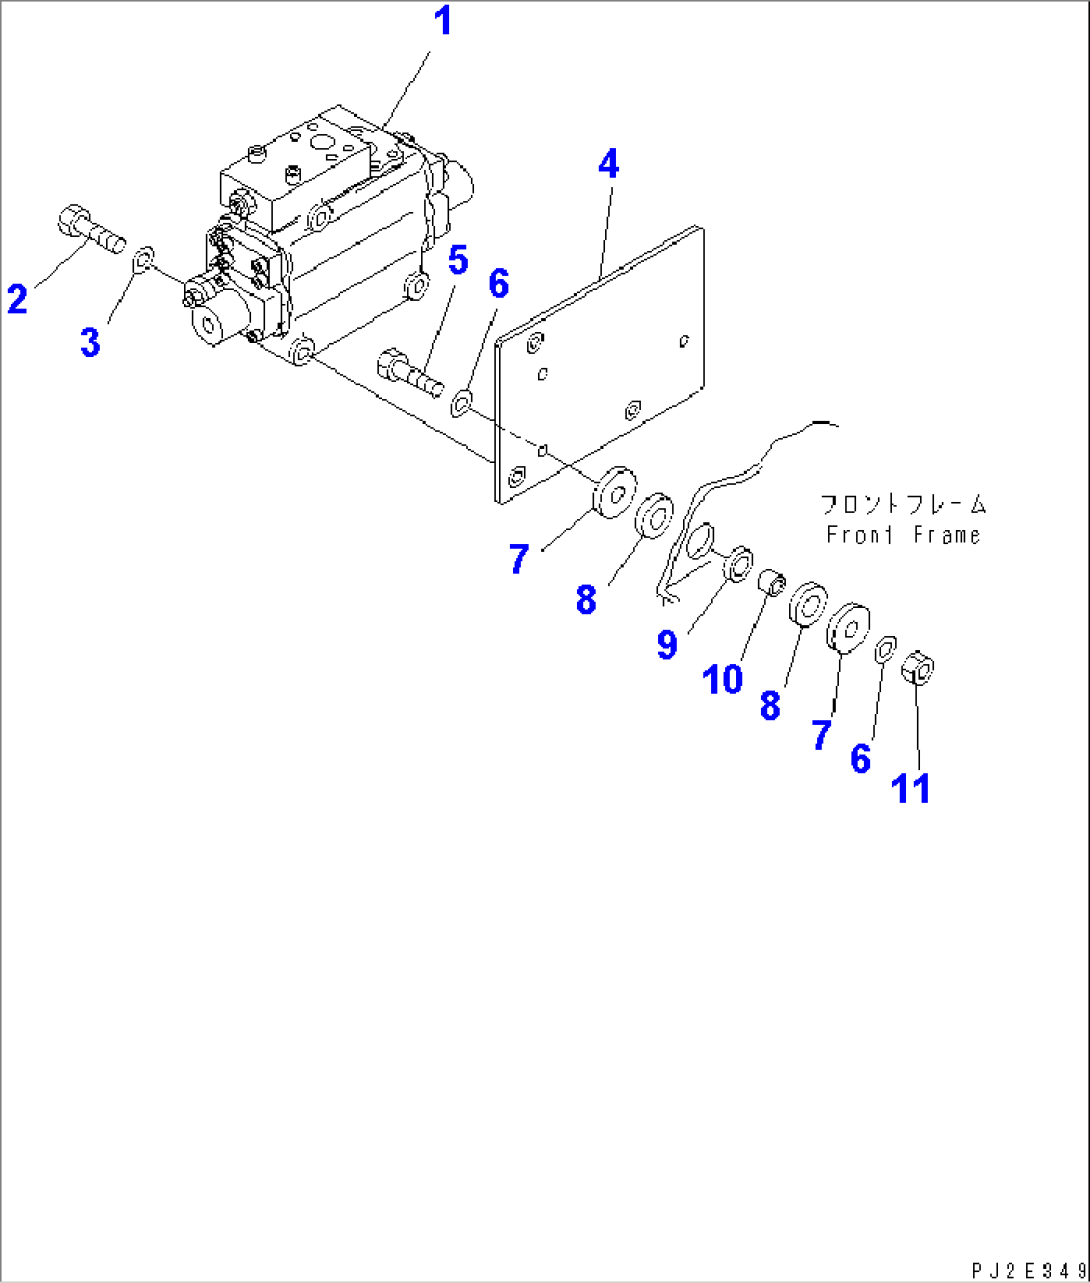 STEERING DEMAND VALVE (VALVE AND MOUNTING PARTS) (WITH ADVANCED JOY STICK STEERING)(#51001-)